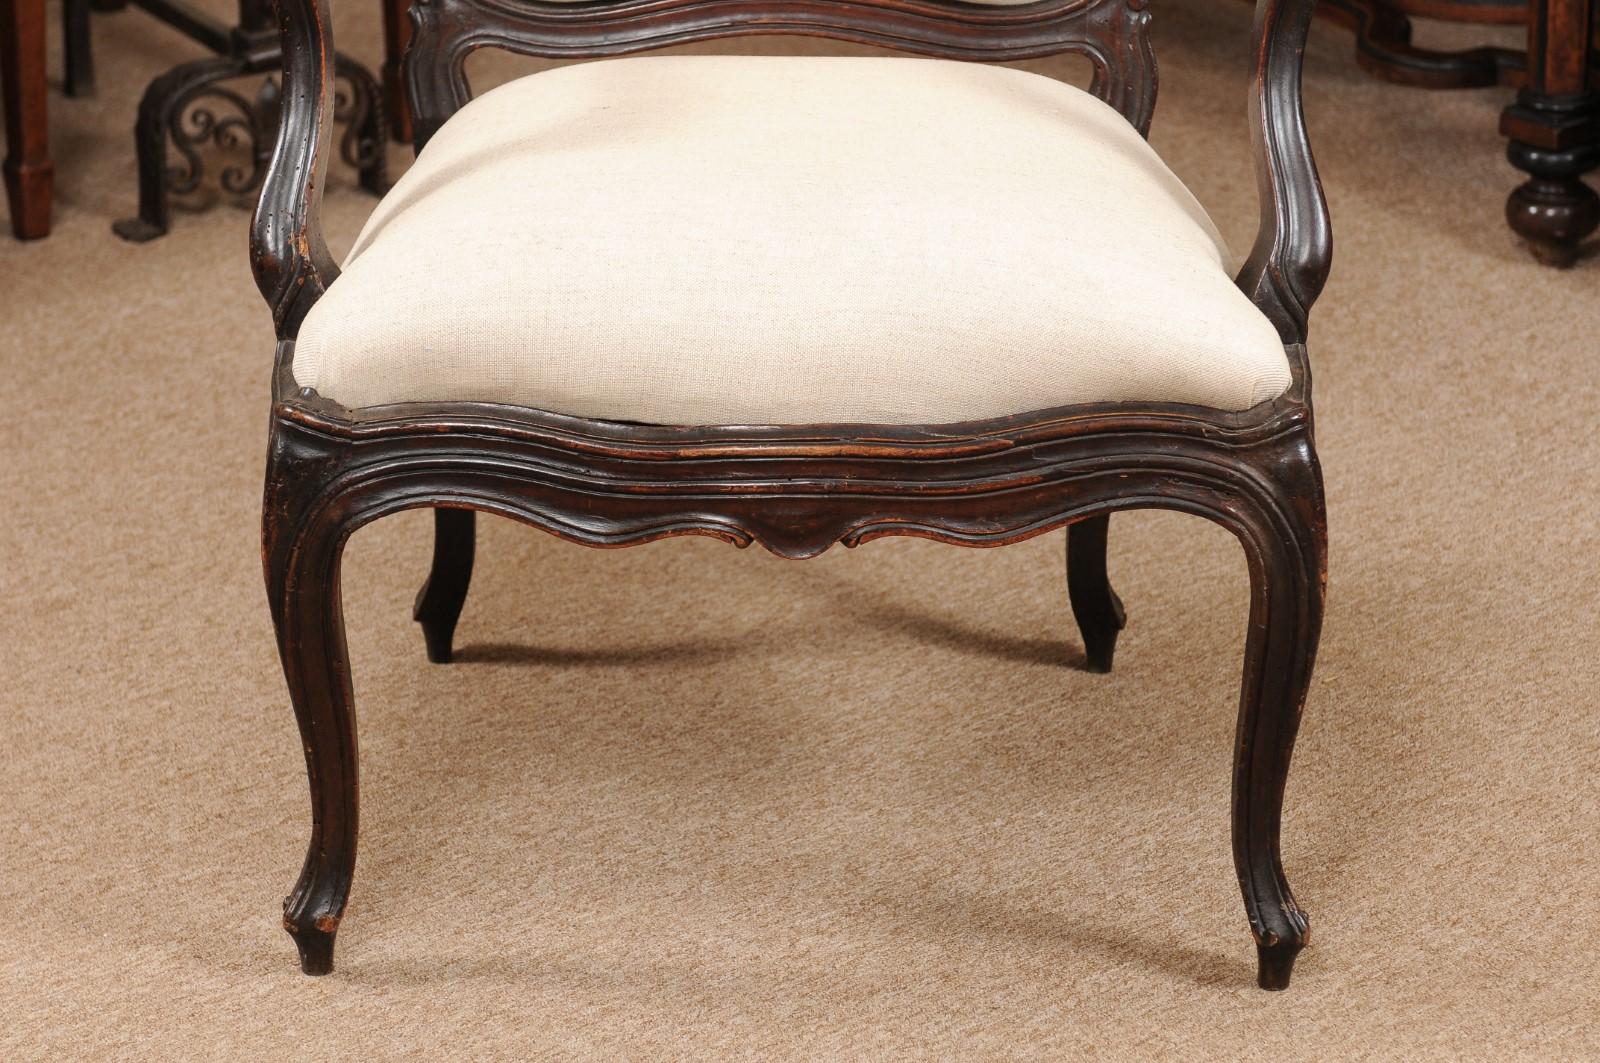 Pair of Rococo Period Walnut Armchairs, Genova, Italy Mid-18th Century For Sale 1